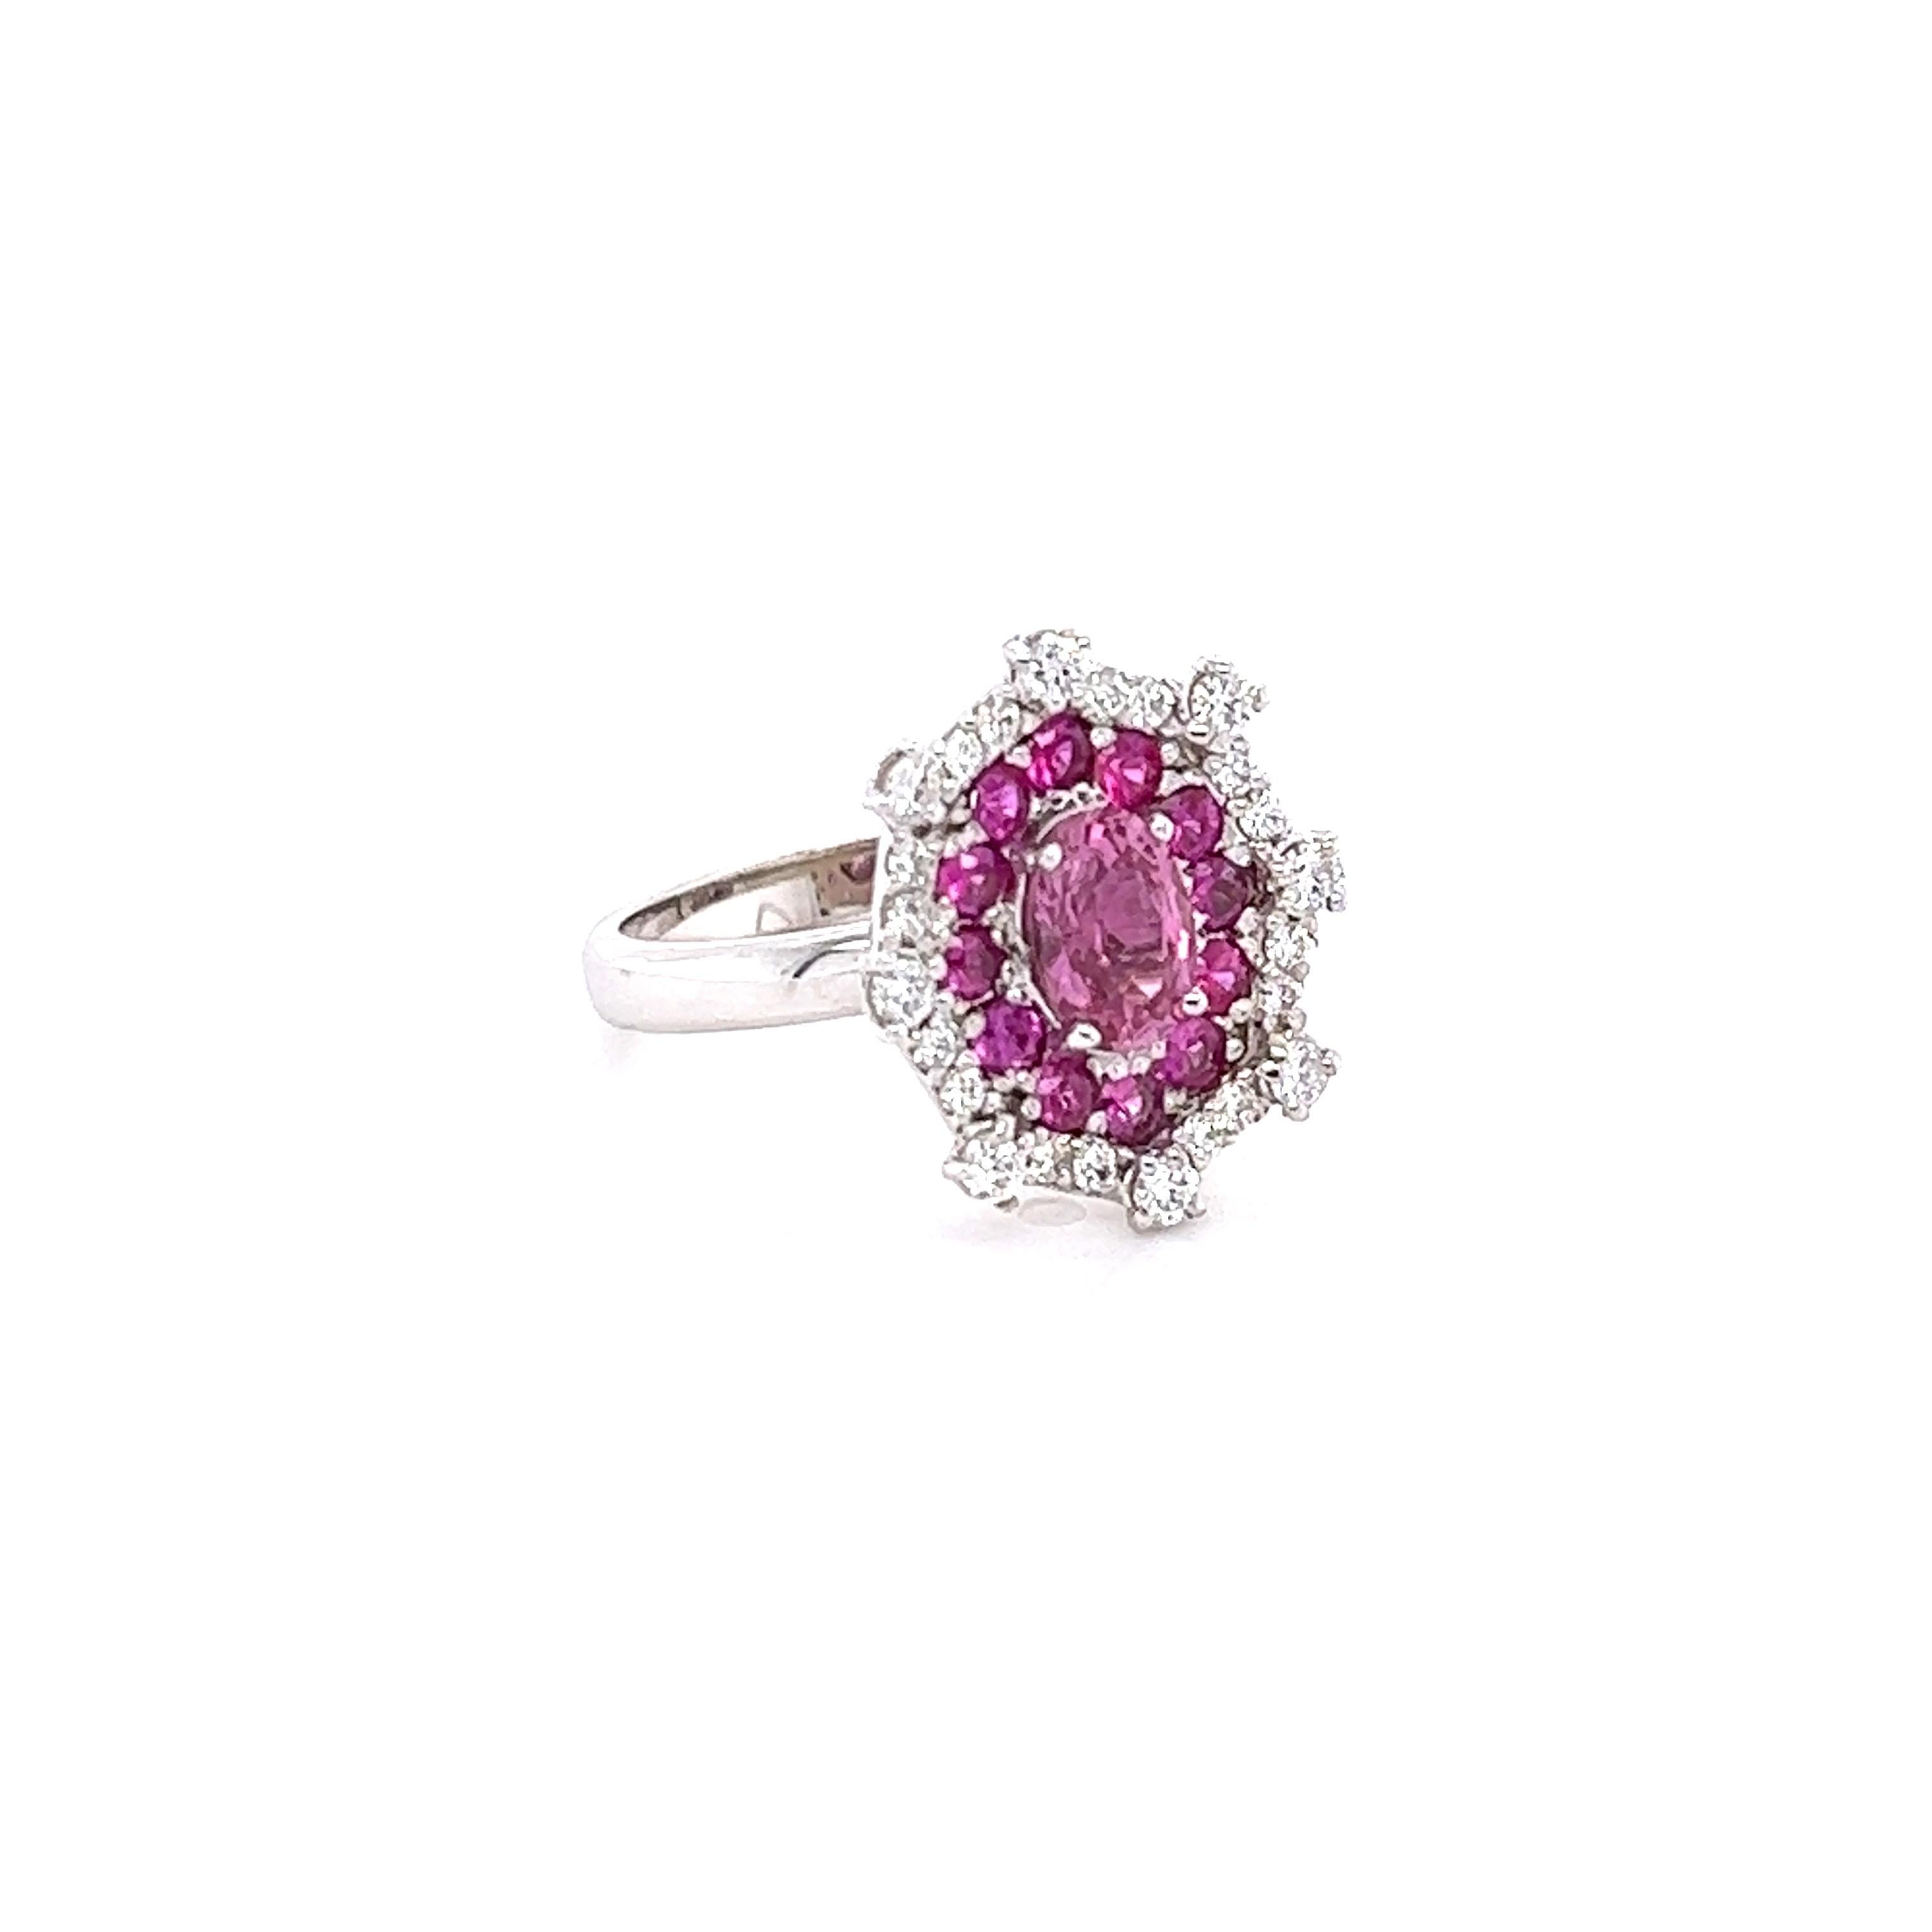 Contemporary 2.01 Carat Pink Sapphire Diamond White Gold Cocktail Ring For Sale